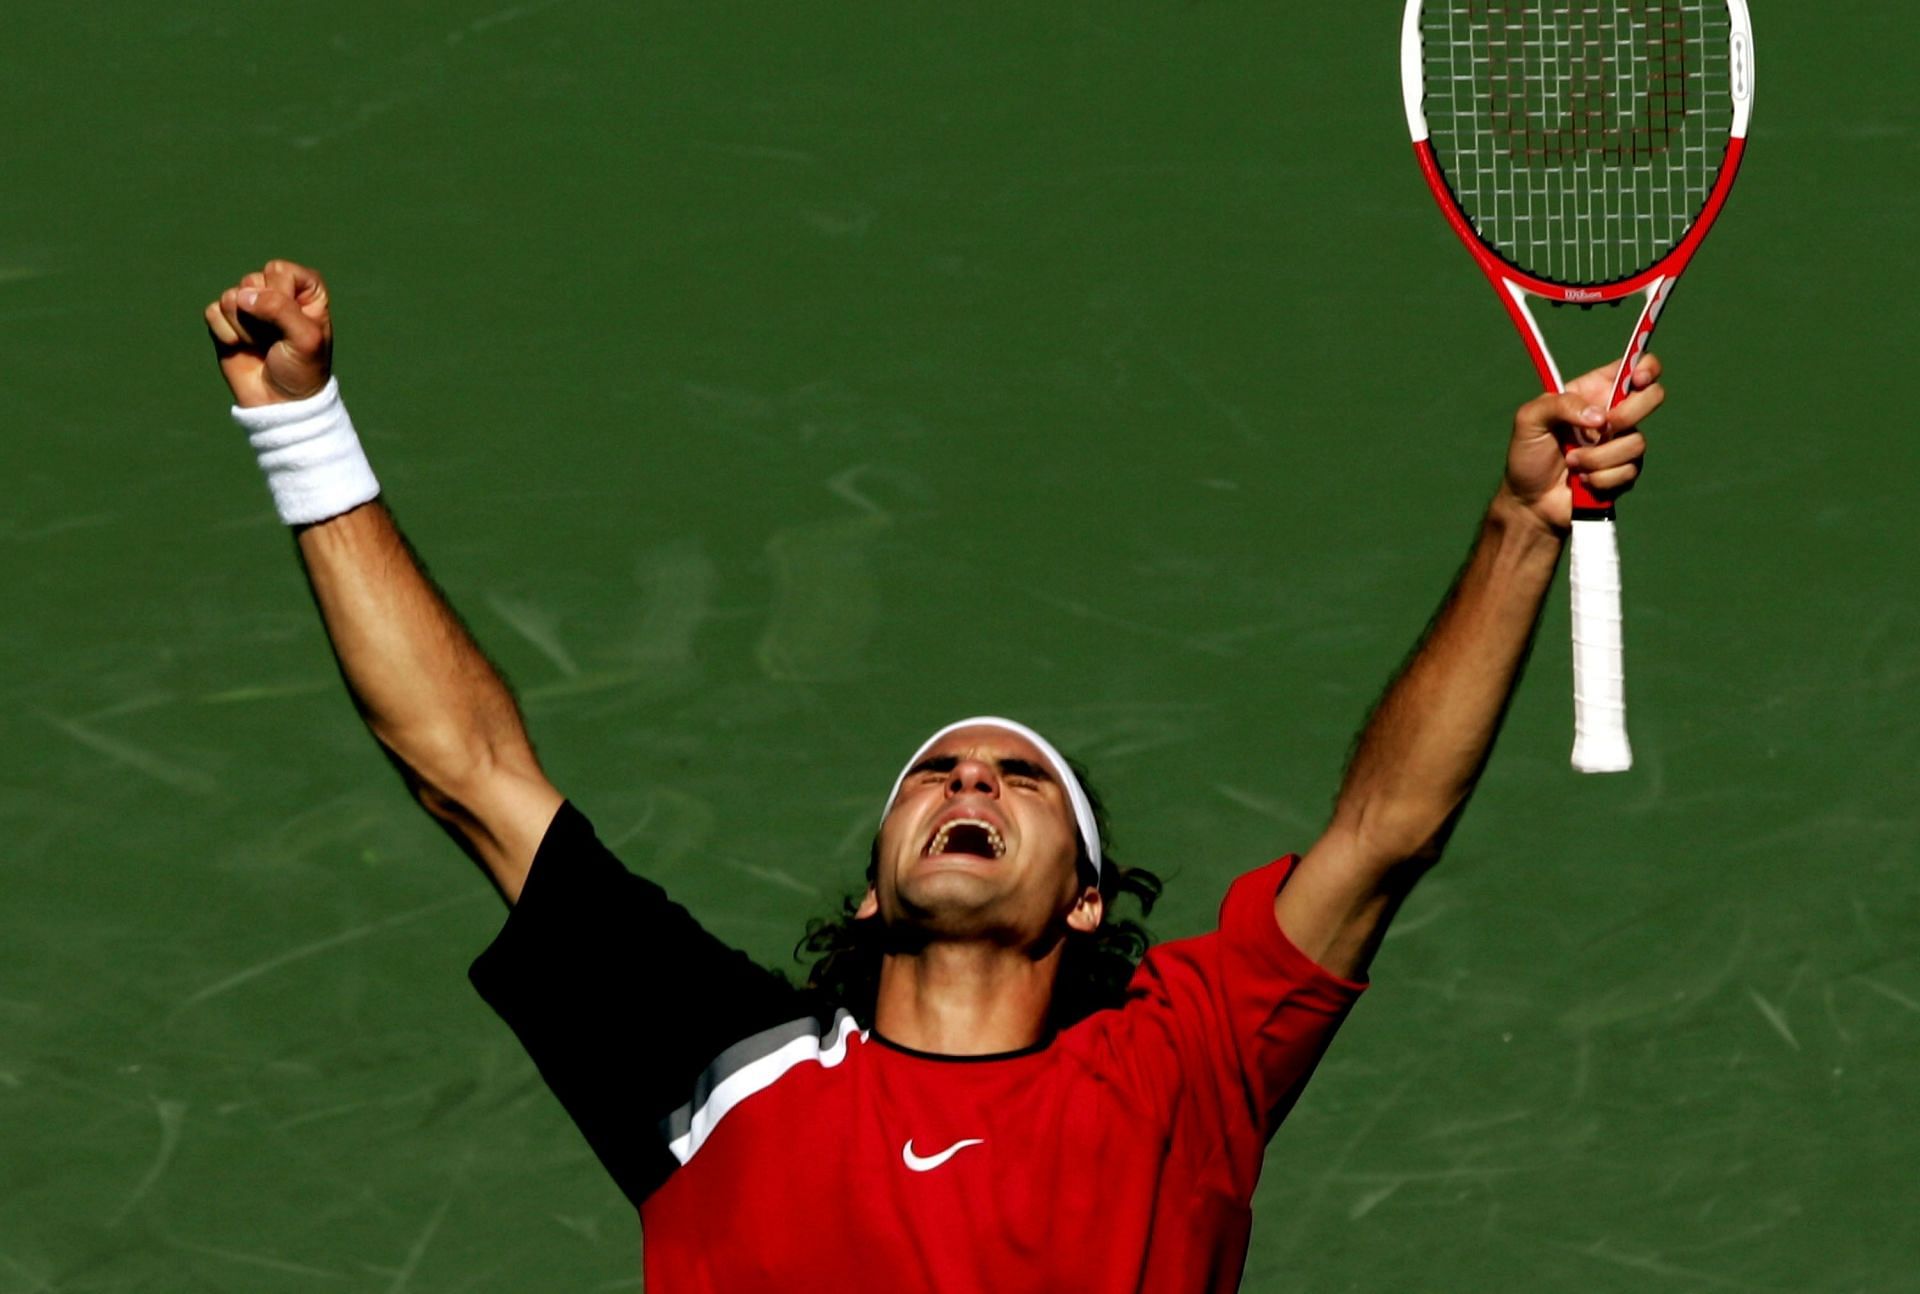 Roger Federer beat Rafael Nadal in the final of the Miami Open in 2005